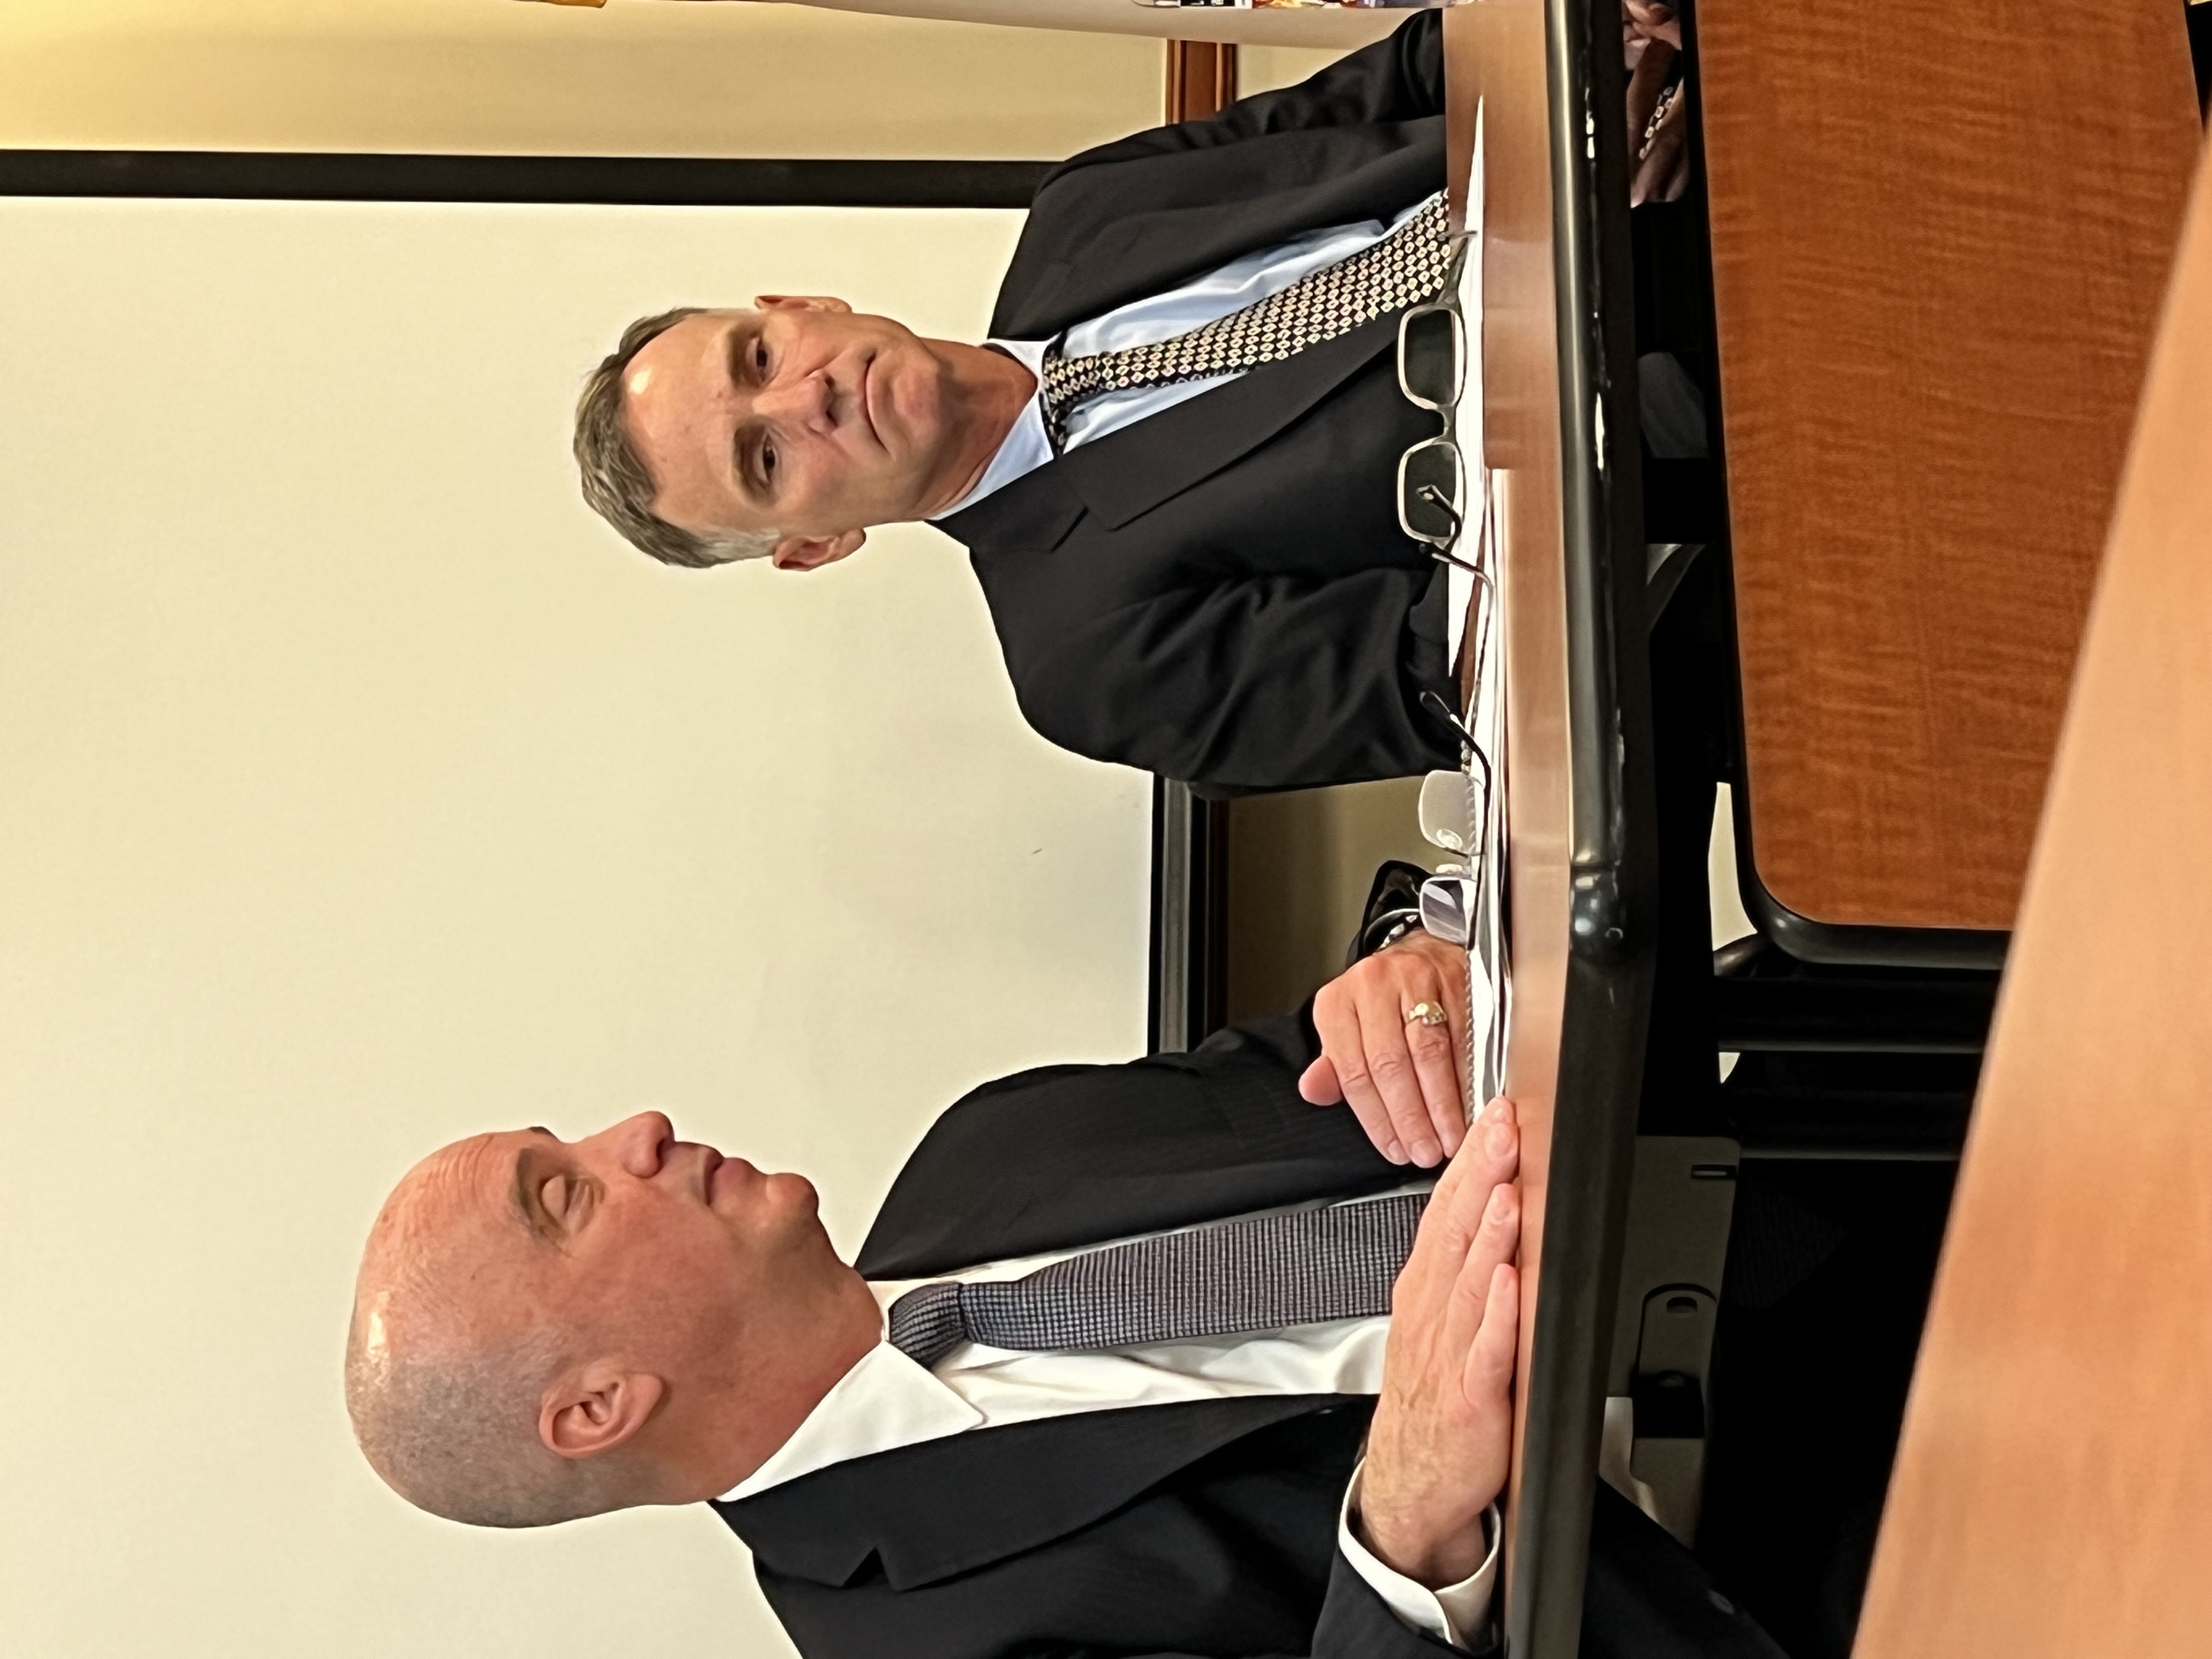 Representatives from Anchor Capital Advisors, William J. Hickey (R), Portfolio Manager and John Boles (L), Director of Institutional Marketing attended the meeting to provide a portfolio update.